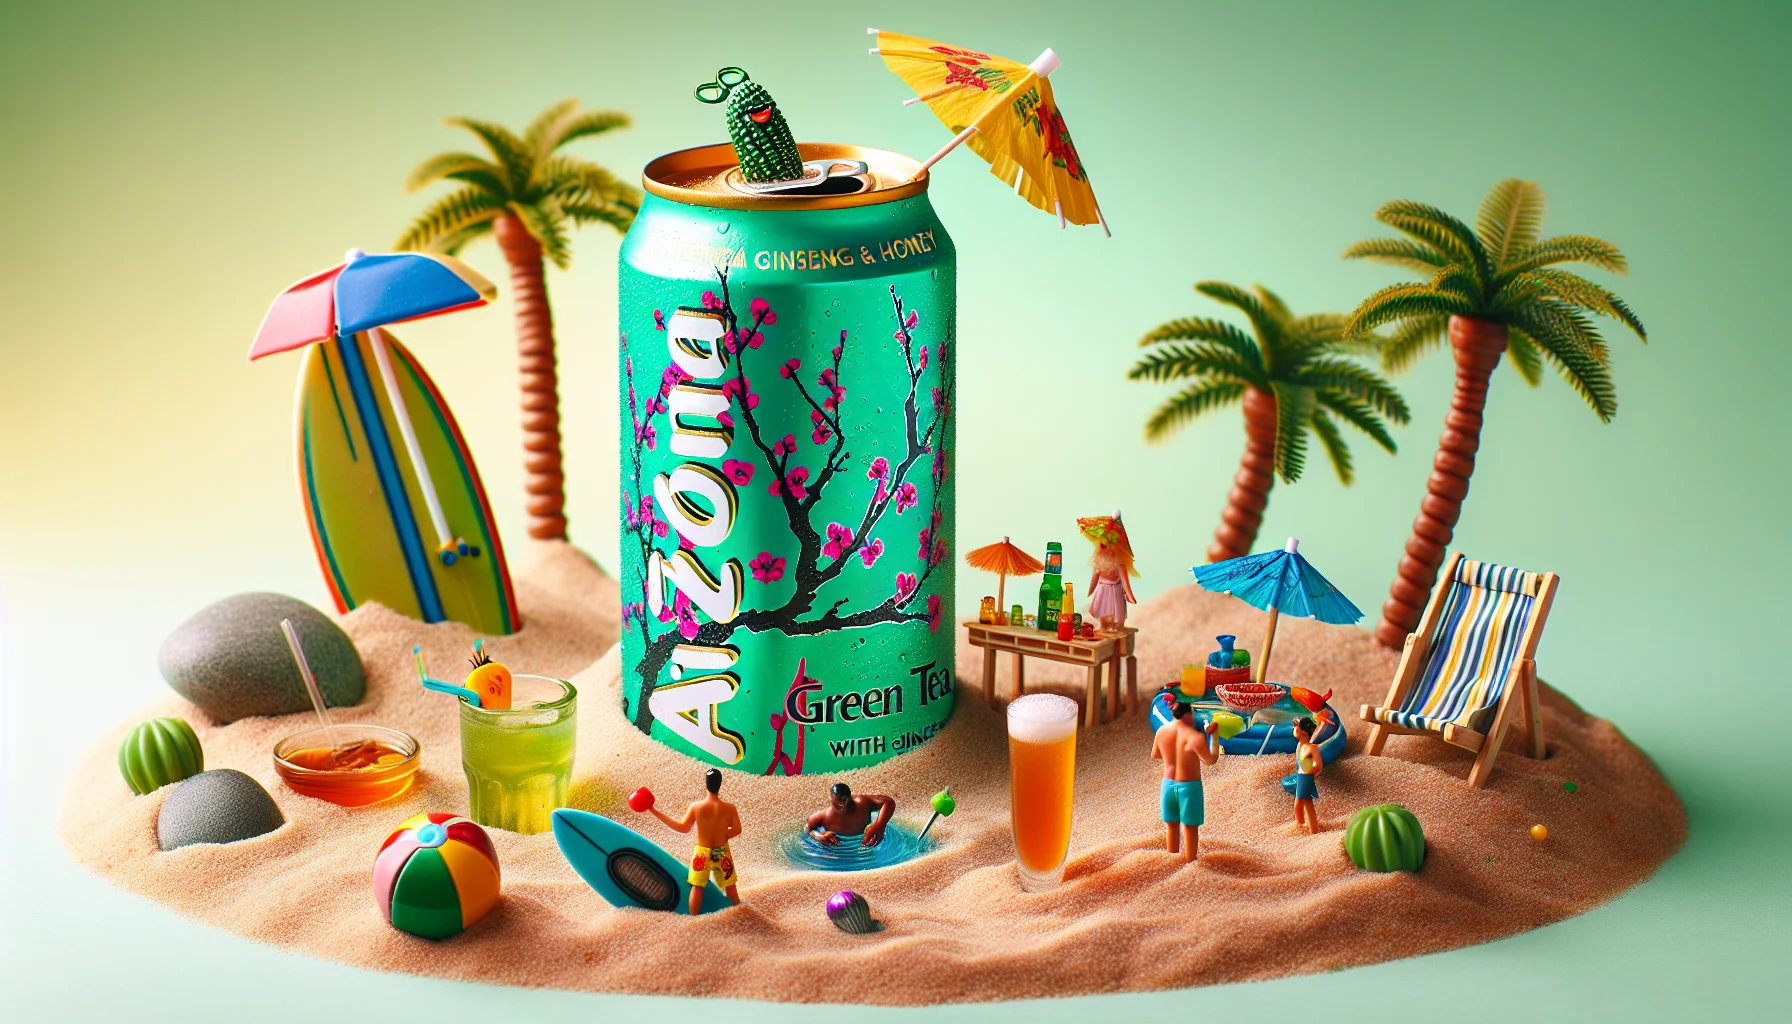 Create a humorous scene featuring a uniquely designed can of Arizona Green Tea with Ginseng and Honey. The can is interacting in a dynamic setting, such as hosting a miniature beach party on a sandy coast, complete with a small umbrella, a tiny surfboard, and vibrant, tropical cocktails around the can. Around it, there are other diminutive objects, like a beach ball and a paper fan, to emphasize the refreshing nature of the drink. The purpose is to revitalize individuals and encourage them to savor the beverage.